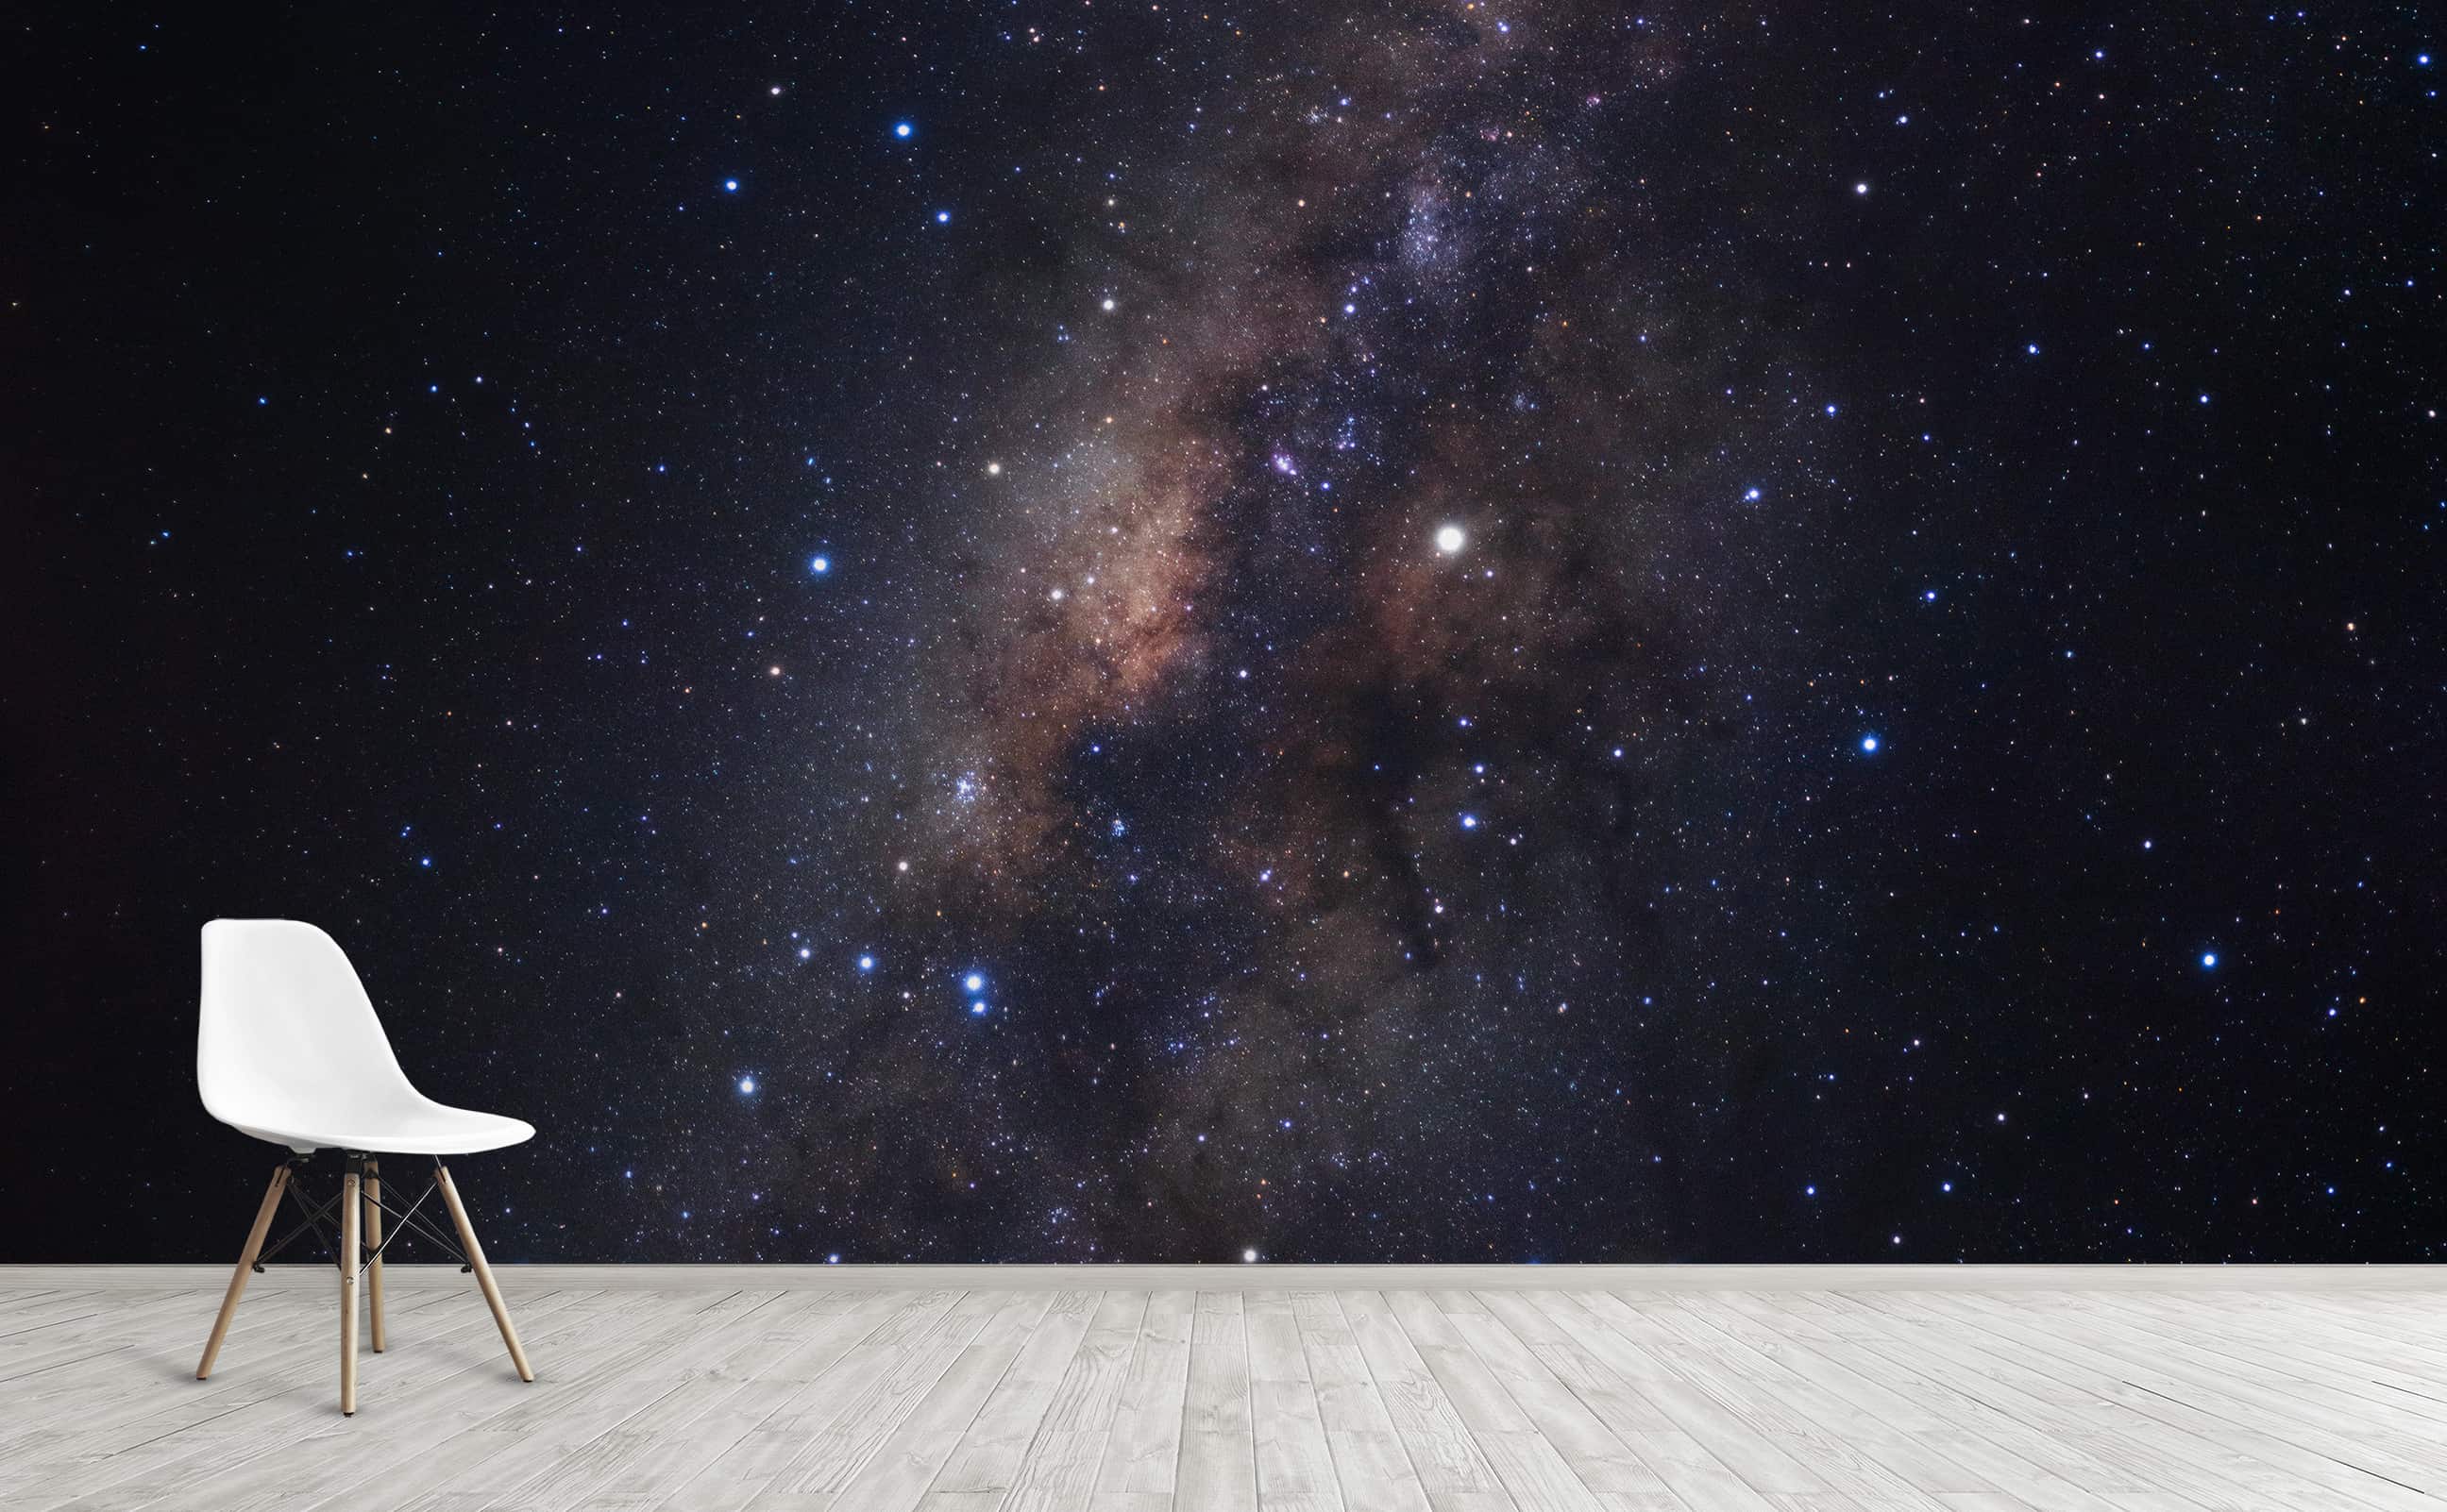 Seeing Stars Wall Mural by Walls Need LoveÂ®